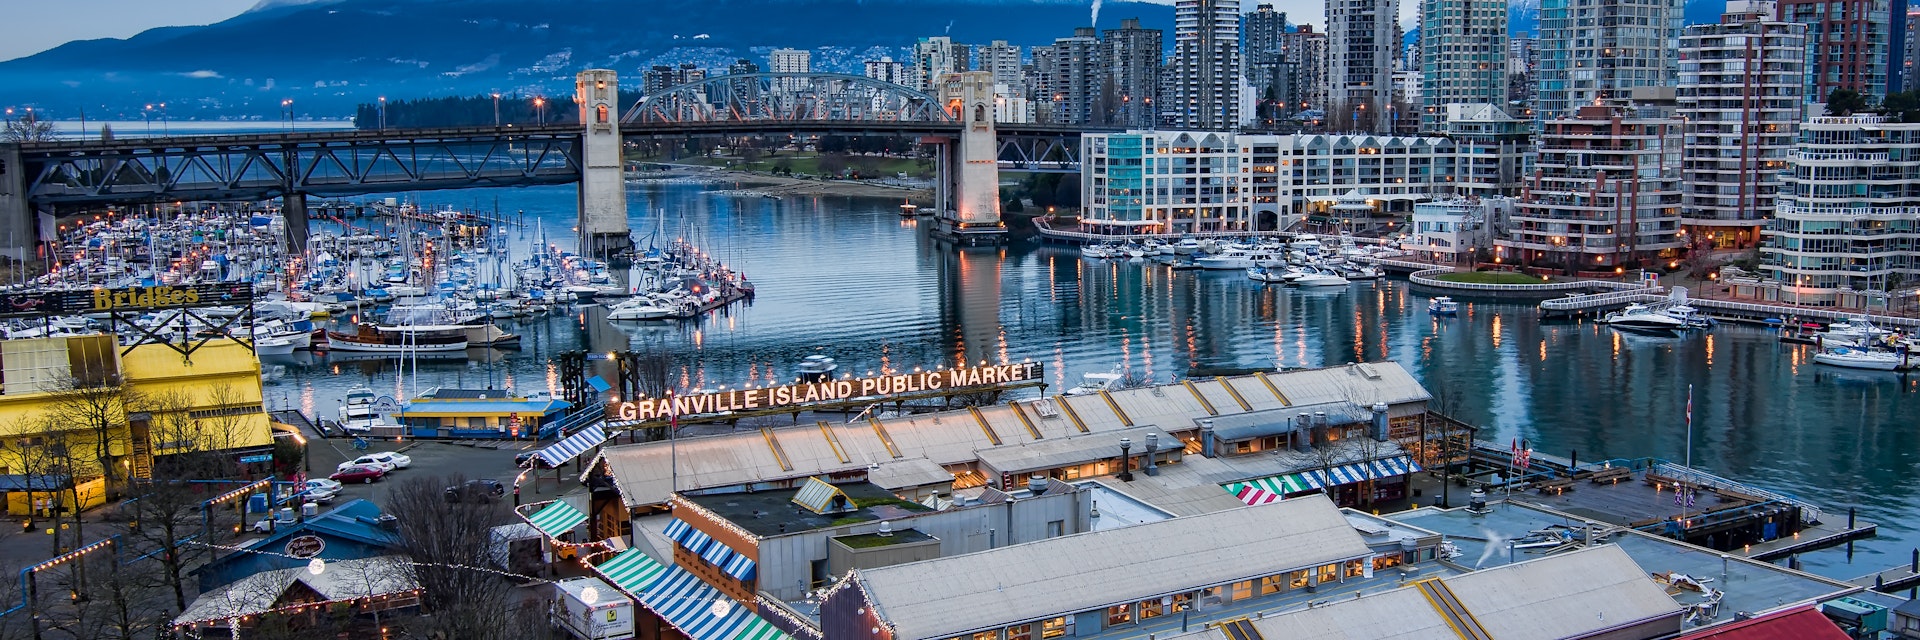 Granville Island Public Market
Apartment, BC, Blue, Boat, Bridge, British Columbia, Building, Buildings, Burrard, Business, Canada, City, Cityscape, Construction, Corporate, Downtown, Estate, False, Ferry, Granville, Granville island, Island, Landscape, Lights, Marina, Market, Mountain, Public, Real, Sea, Sky, Skyline, Summer, Sunset, Travel, Vancouver, Water, Wide Angle, Yaletown, architecture, british, columbia, destination, fresh, living, luxury, nobody, outdoors, scene, skyscraper, tourism, tourist, tower, urban, waterfront, yacht
The view of Granville Island from Granville street bridge.